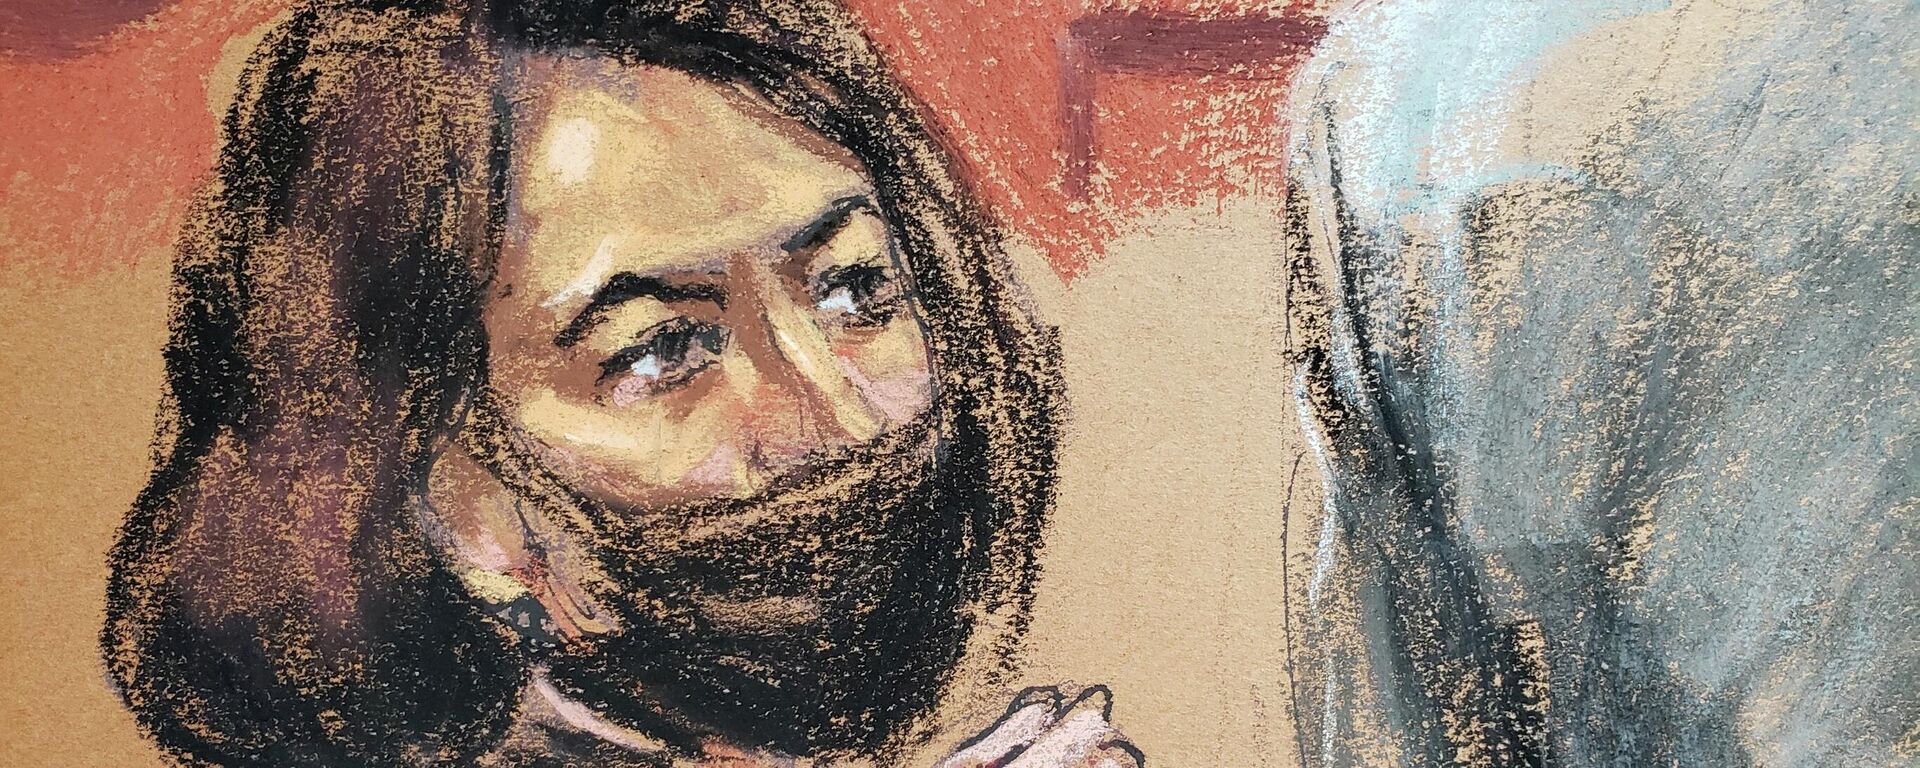 Ghislaine Maxwell watches as witness Eva Andersson is questioned by defense attorney Jeffrey Pagliuca during the trial of Maxwell, the Jeffrey Epstein associate accused of sex trafficking, in a courtroom sketch in New York City, U.S., December 17, 2021. - Sputnik International, 1920, 25.12.2021